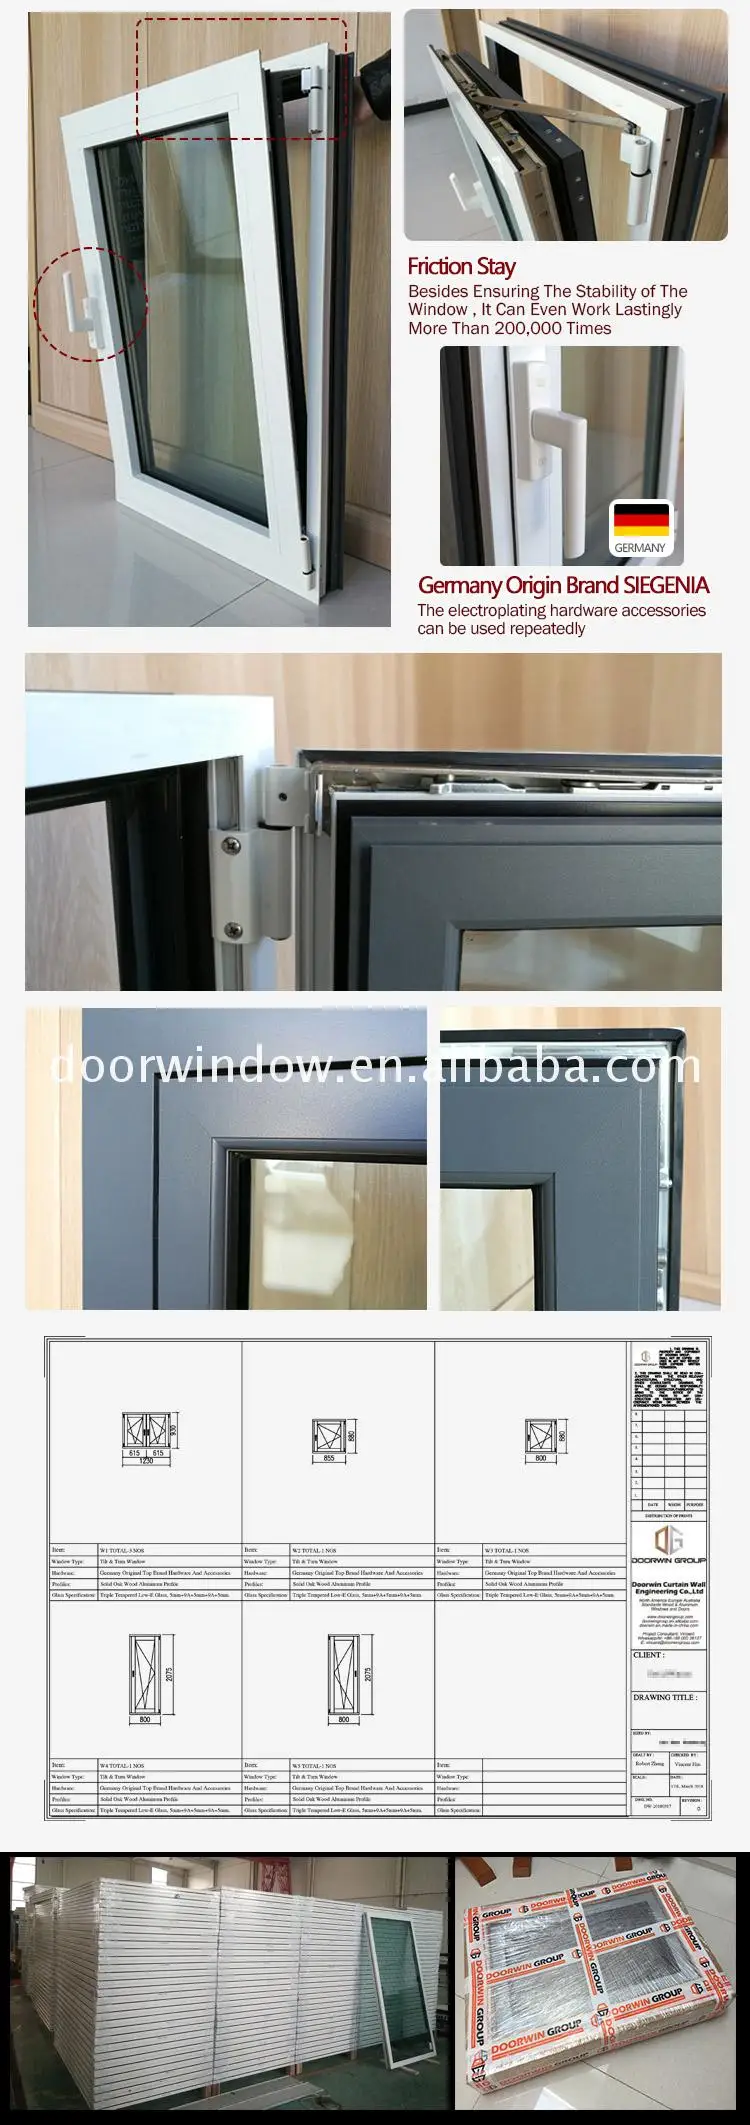 New Style powder coated casement window philippines aluminium outward windows and doors with Waterproof function